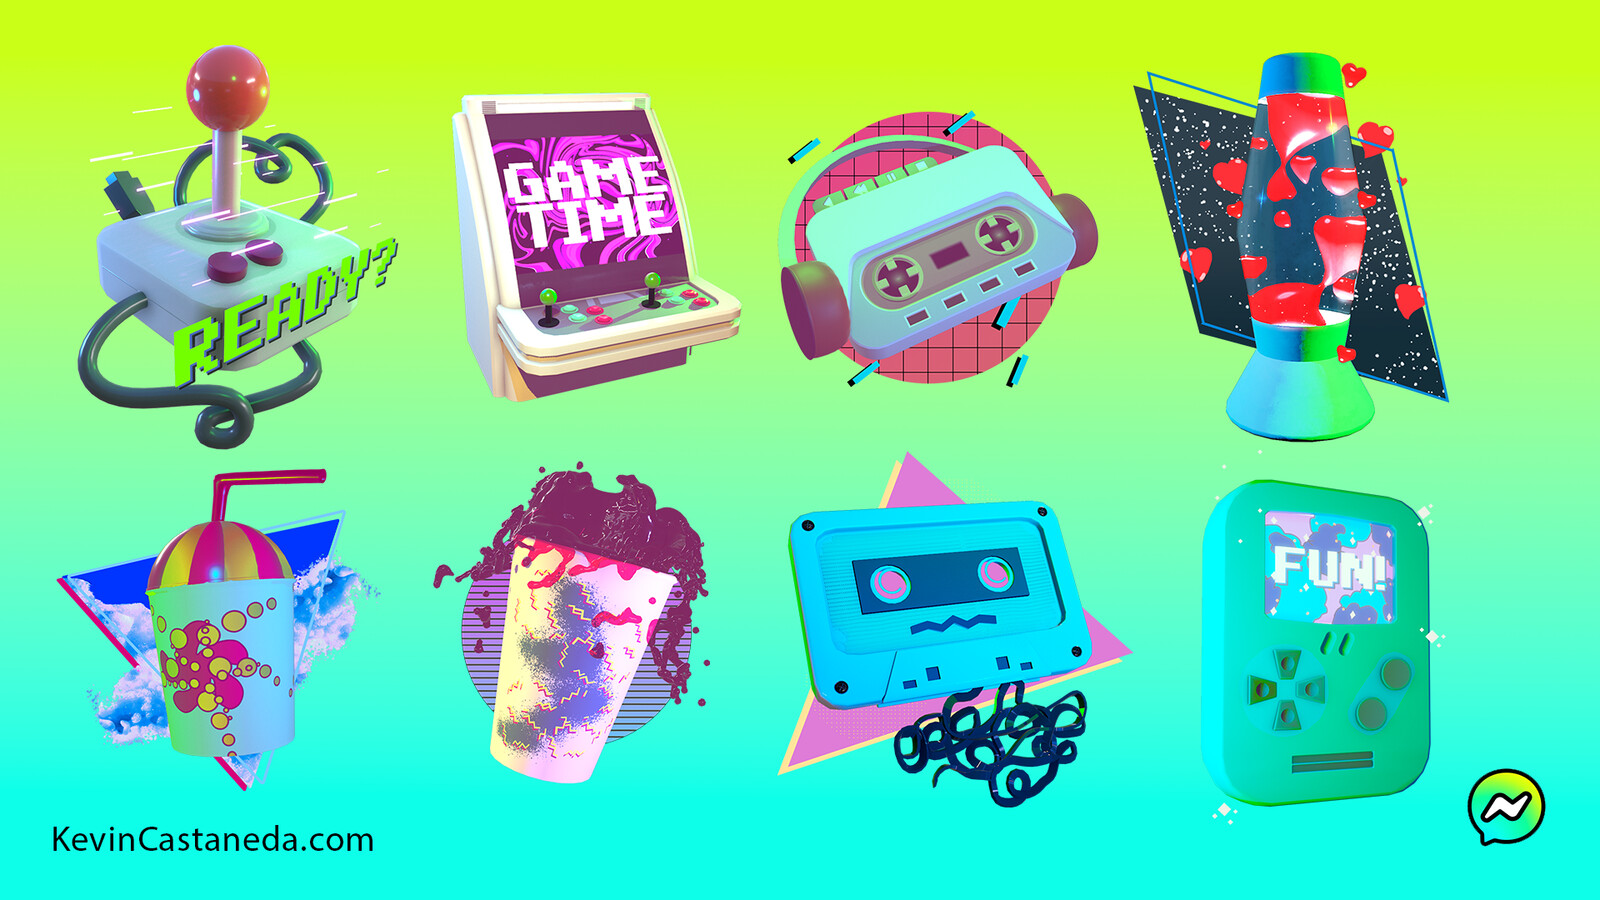 My retro 80's sticker pack published onto Messenger Kids. Concepts and final artwork by me. Done in Maya, Substance Painter and Photoshop.